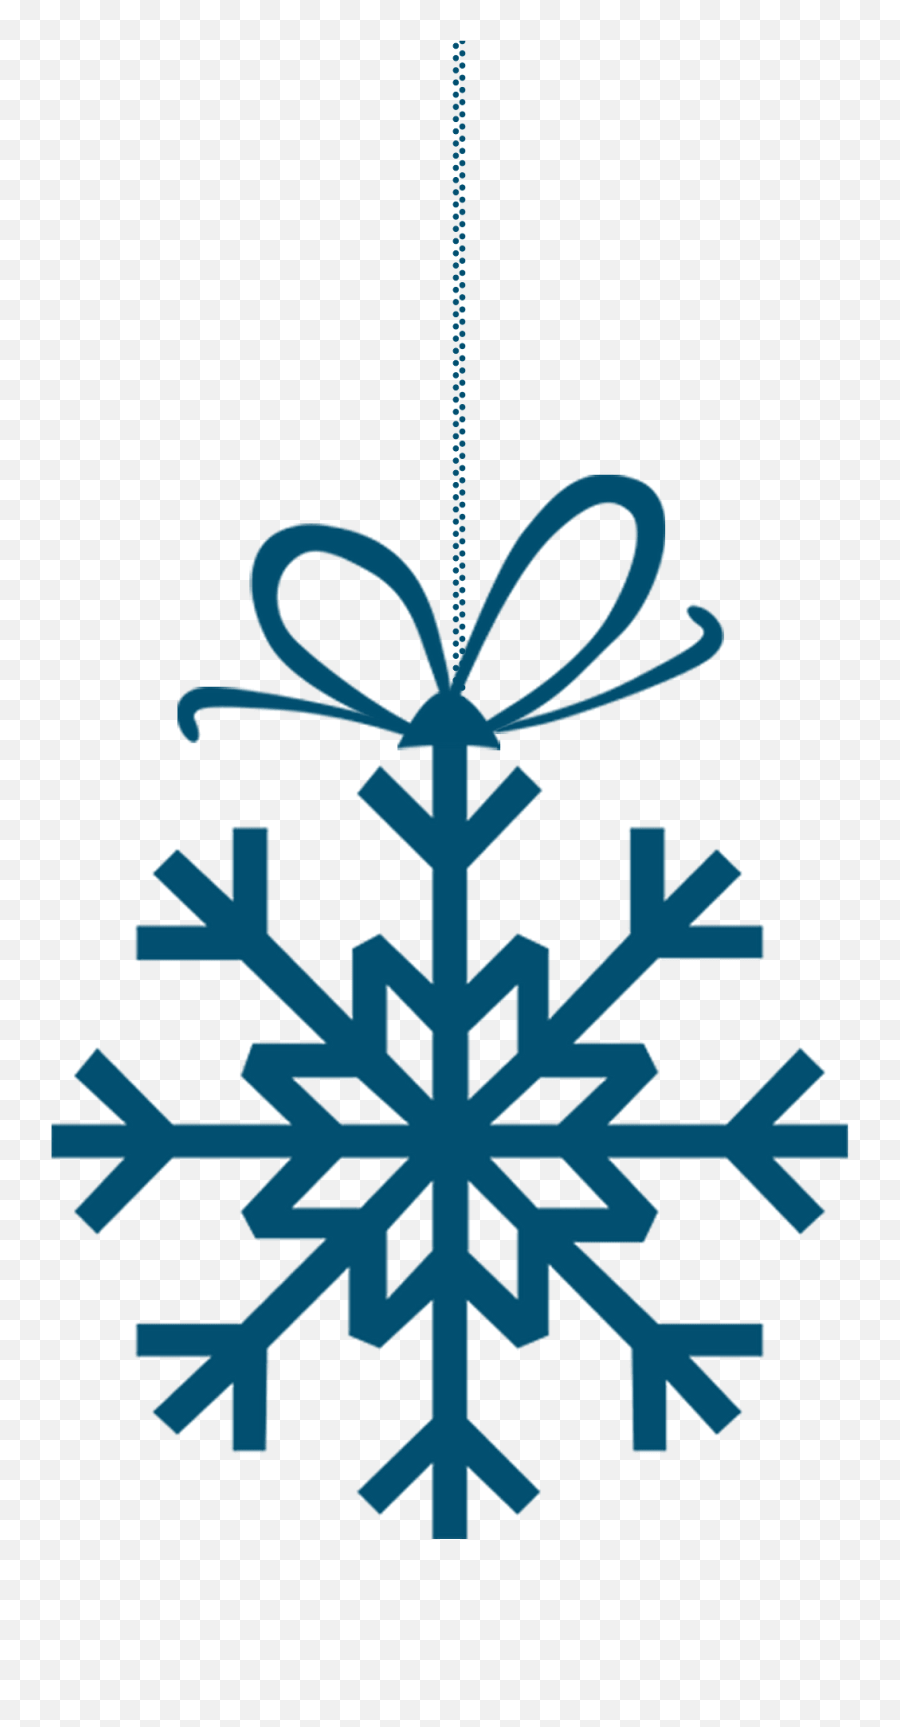 Snowflake Clipart Free Download Transparent Png Creazilla - Snowflake Icon Emoji,Snowflake Clipart